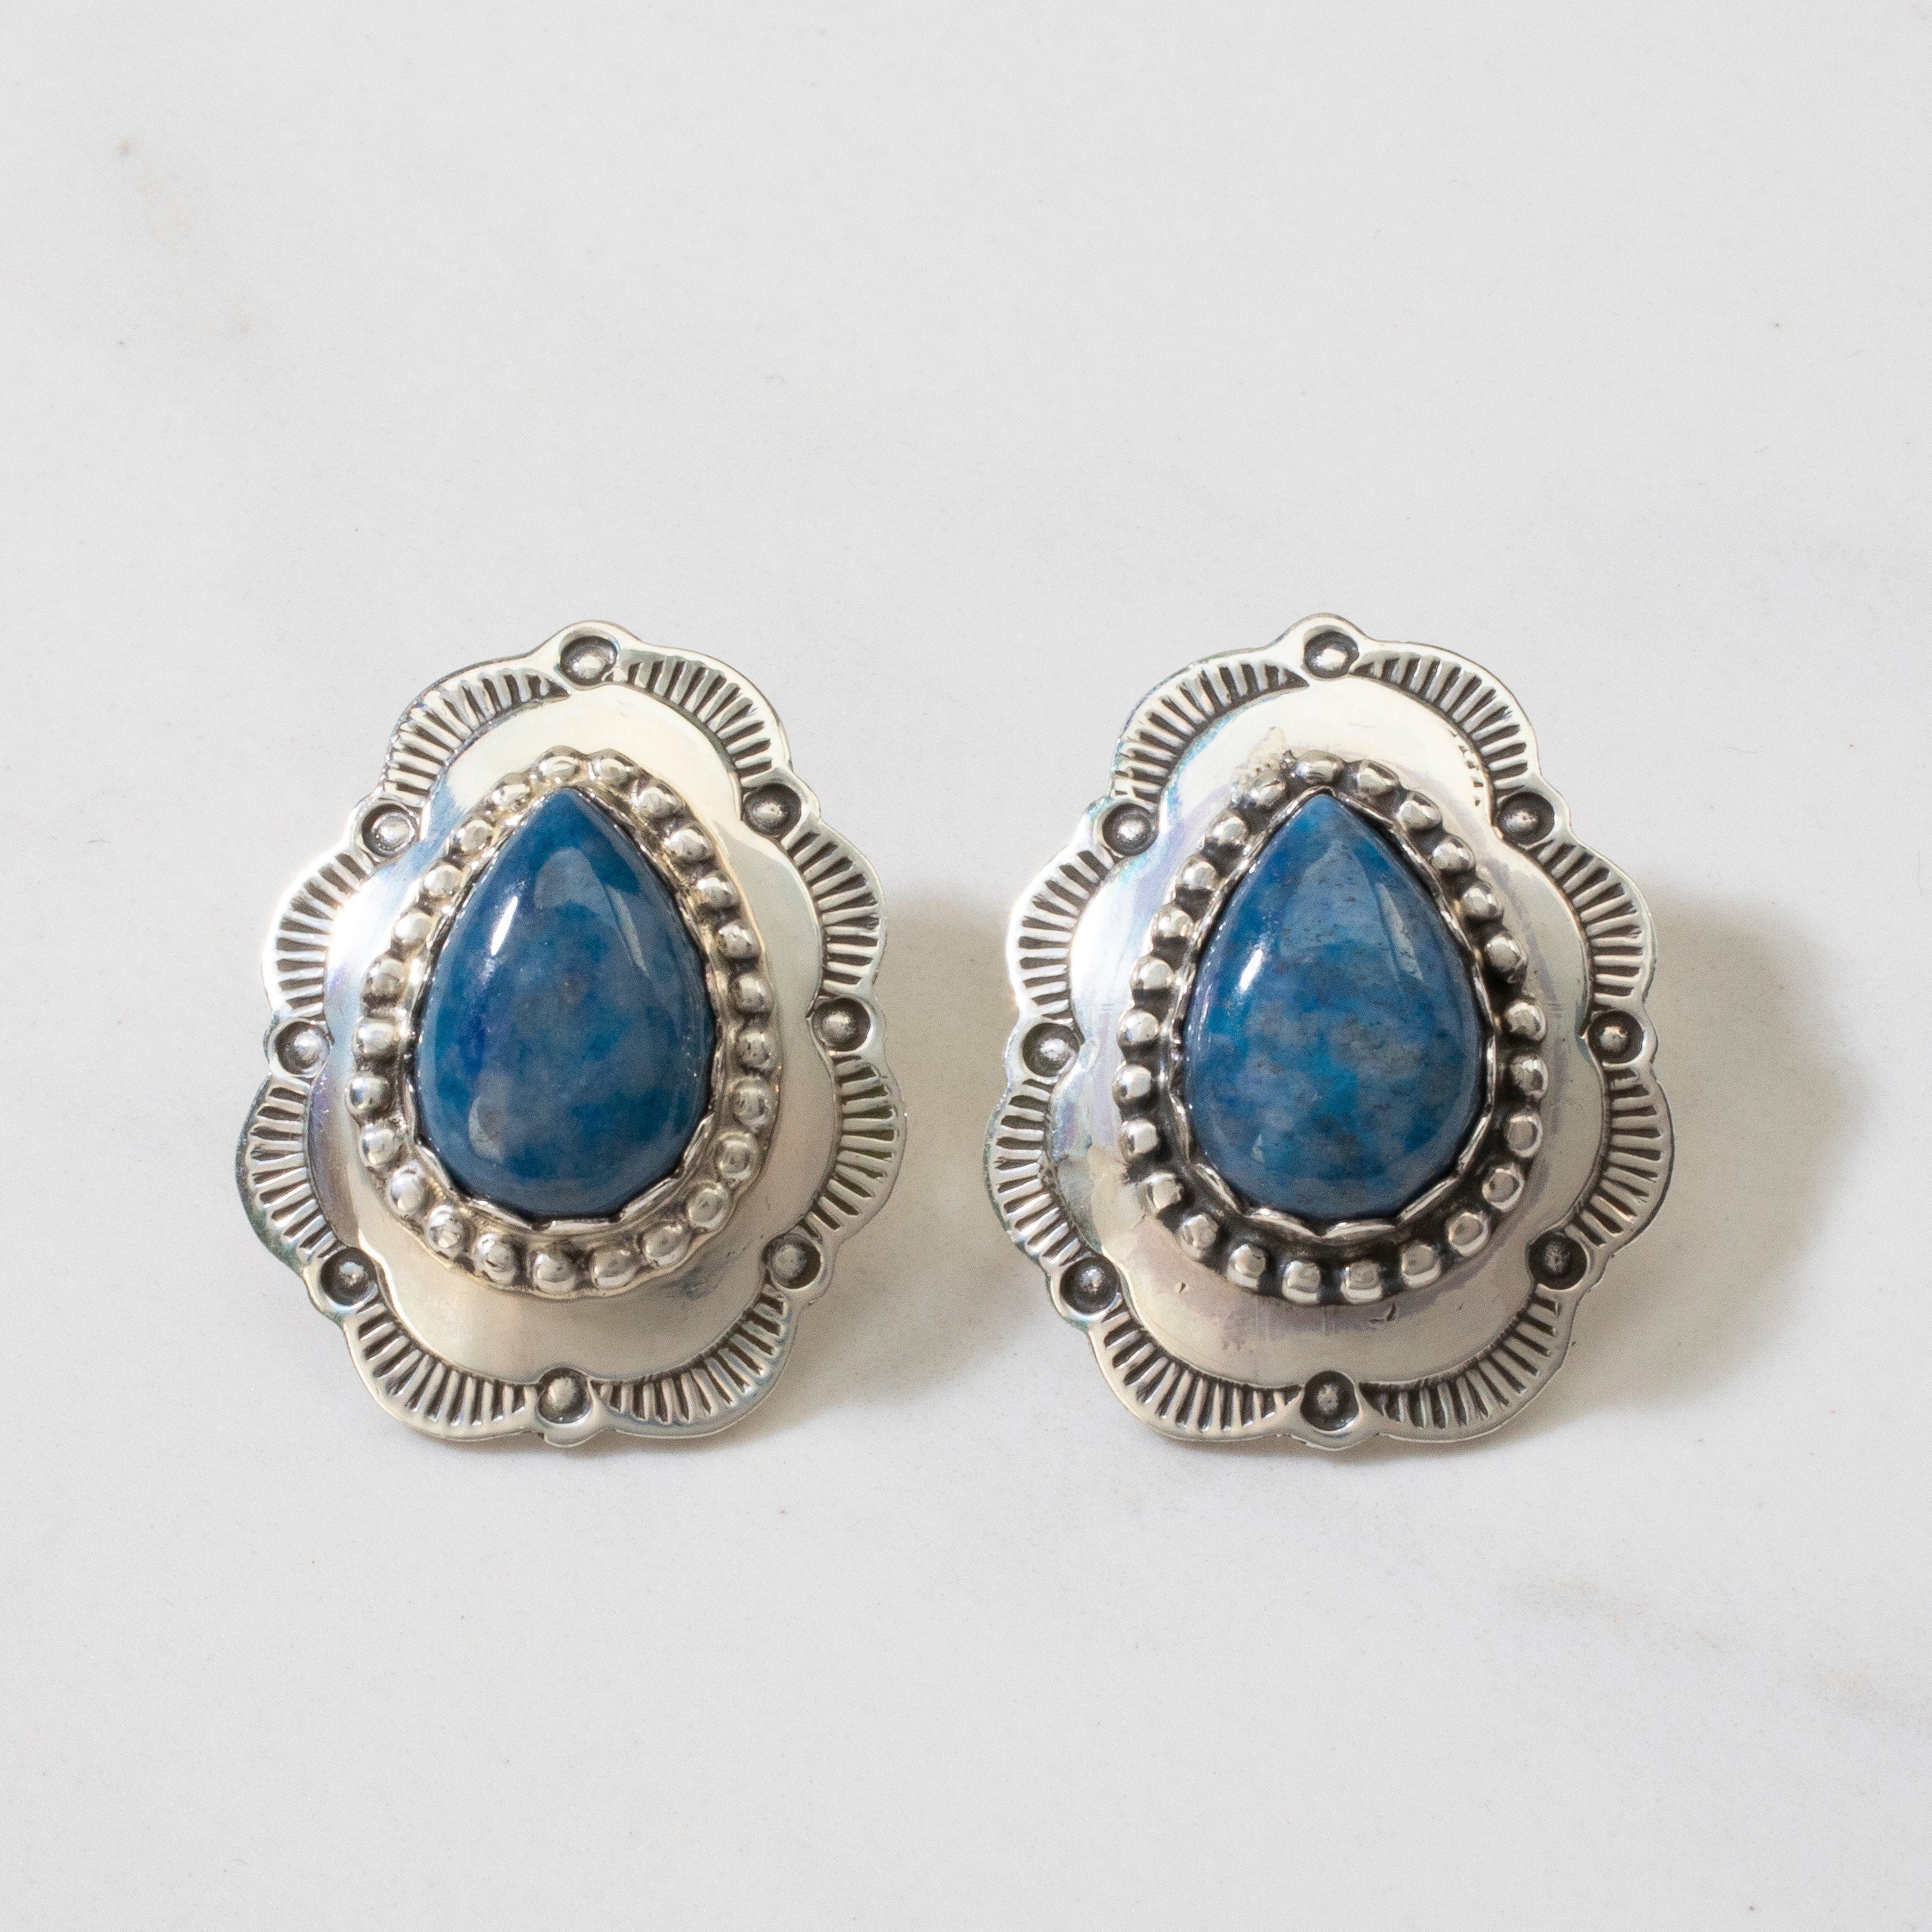 Kalifano Native American Jewelry Denim Lapis Teardrop Navajo USA Native American Made 925 Sterling Silver Earrings with Stud Backing NAE600.022